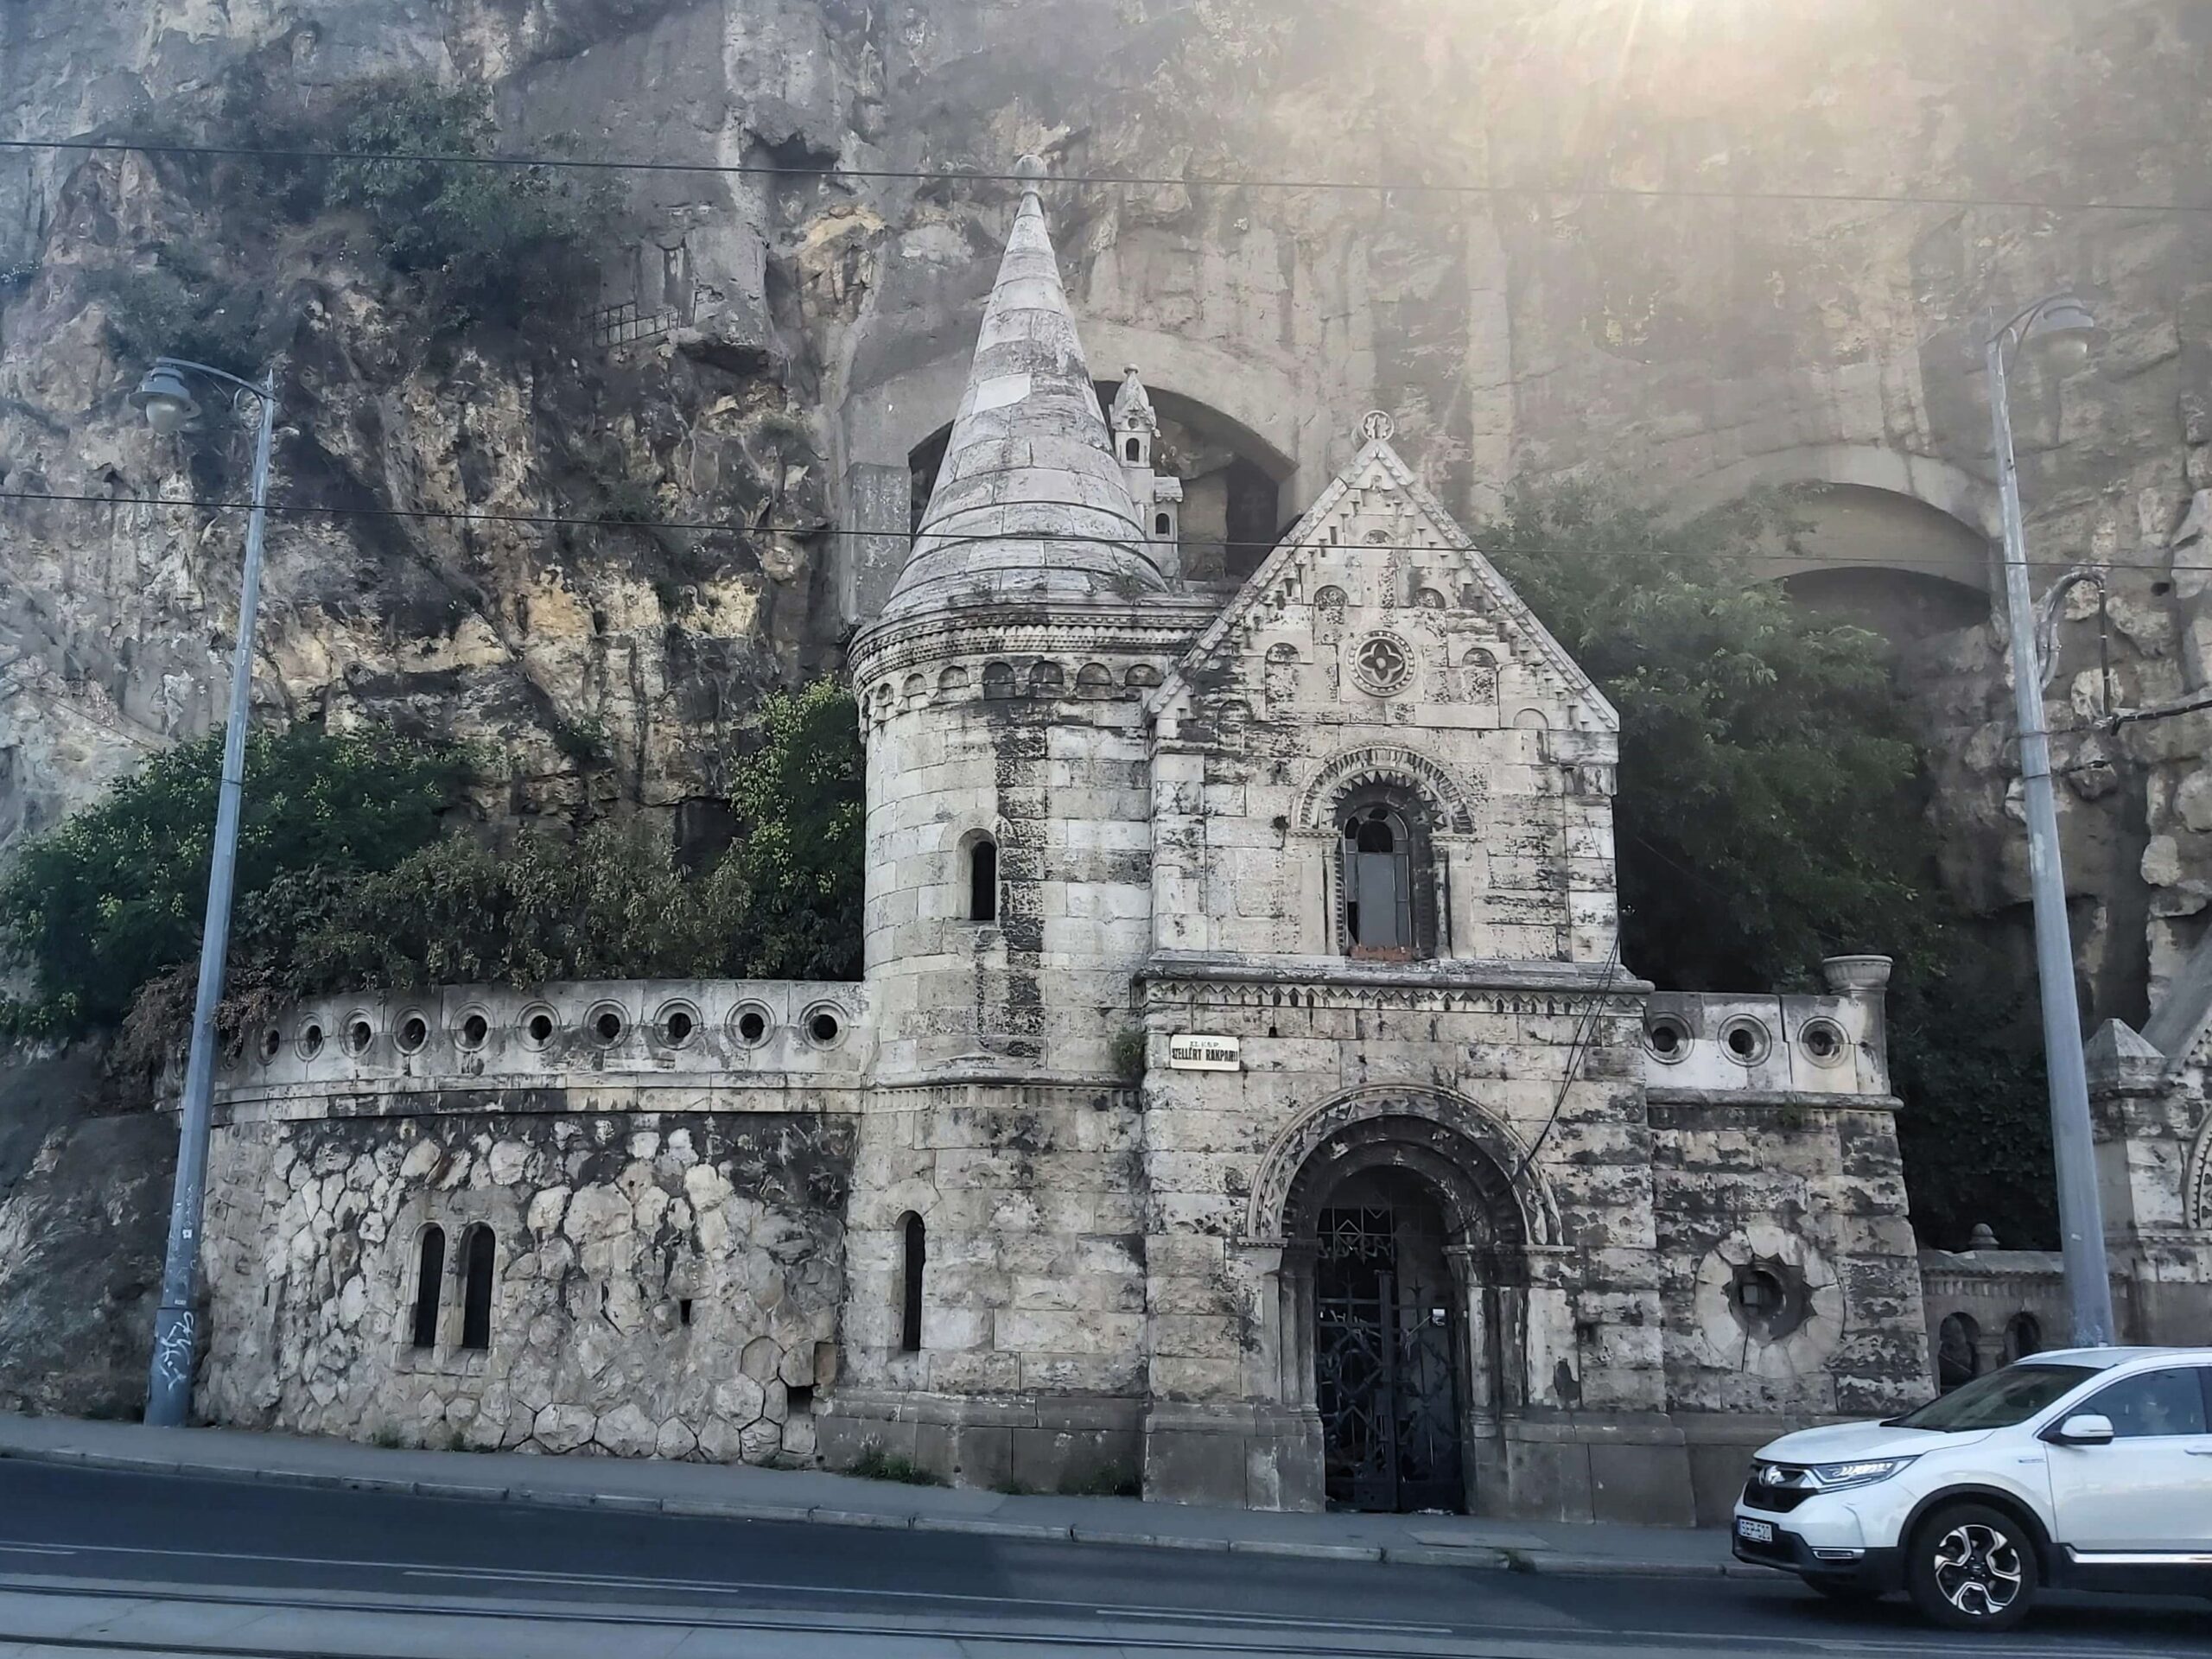 A closer view of Cave Church, Budapest, Hungary